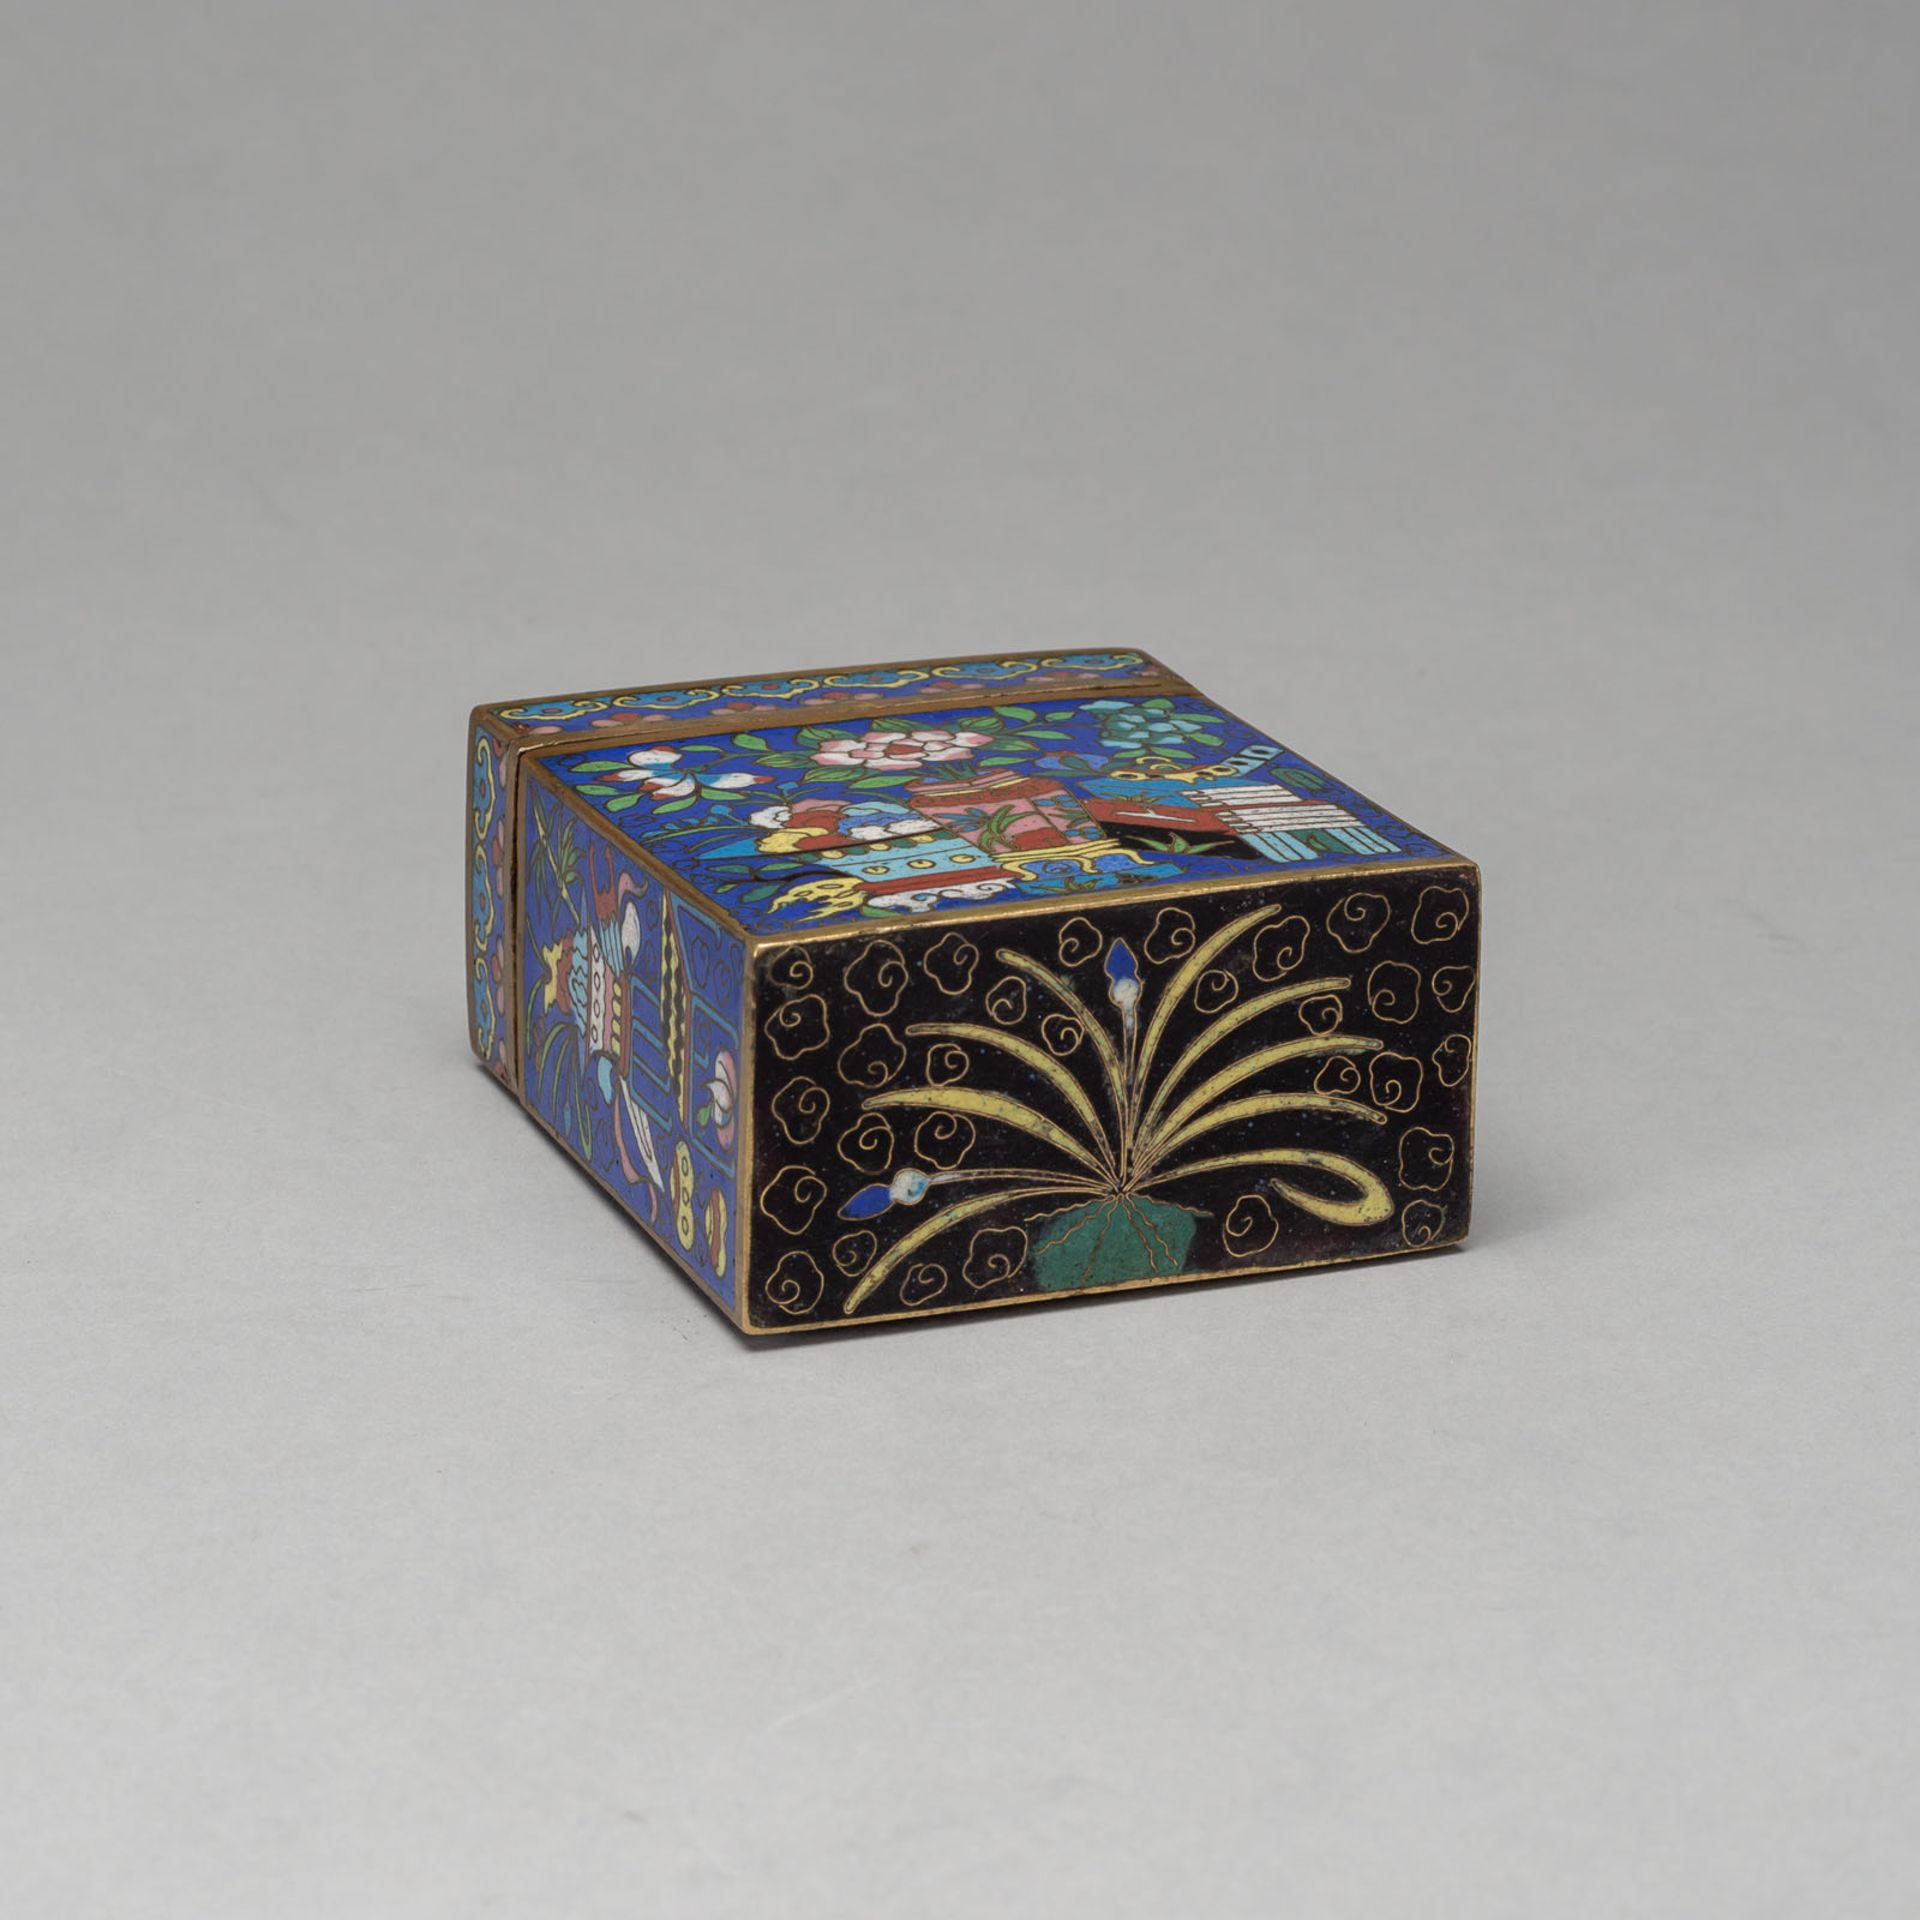 A CLOISONNÉ ENAMEL FLOWERS AND ANTIQUITIES BOX WITH COVER - Image 3 of 3